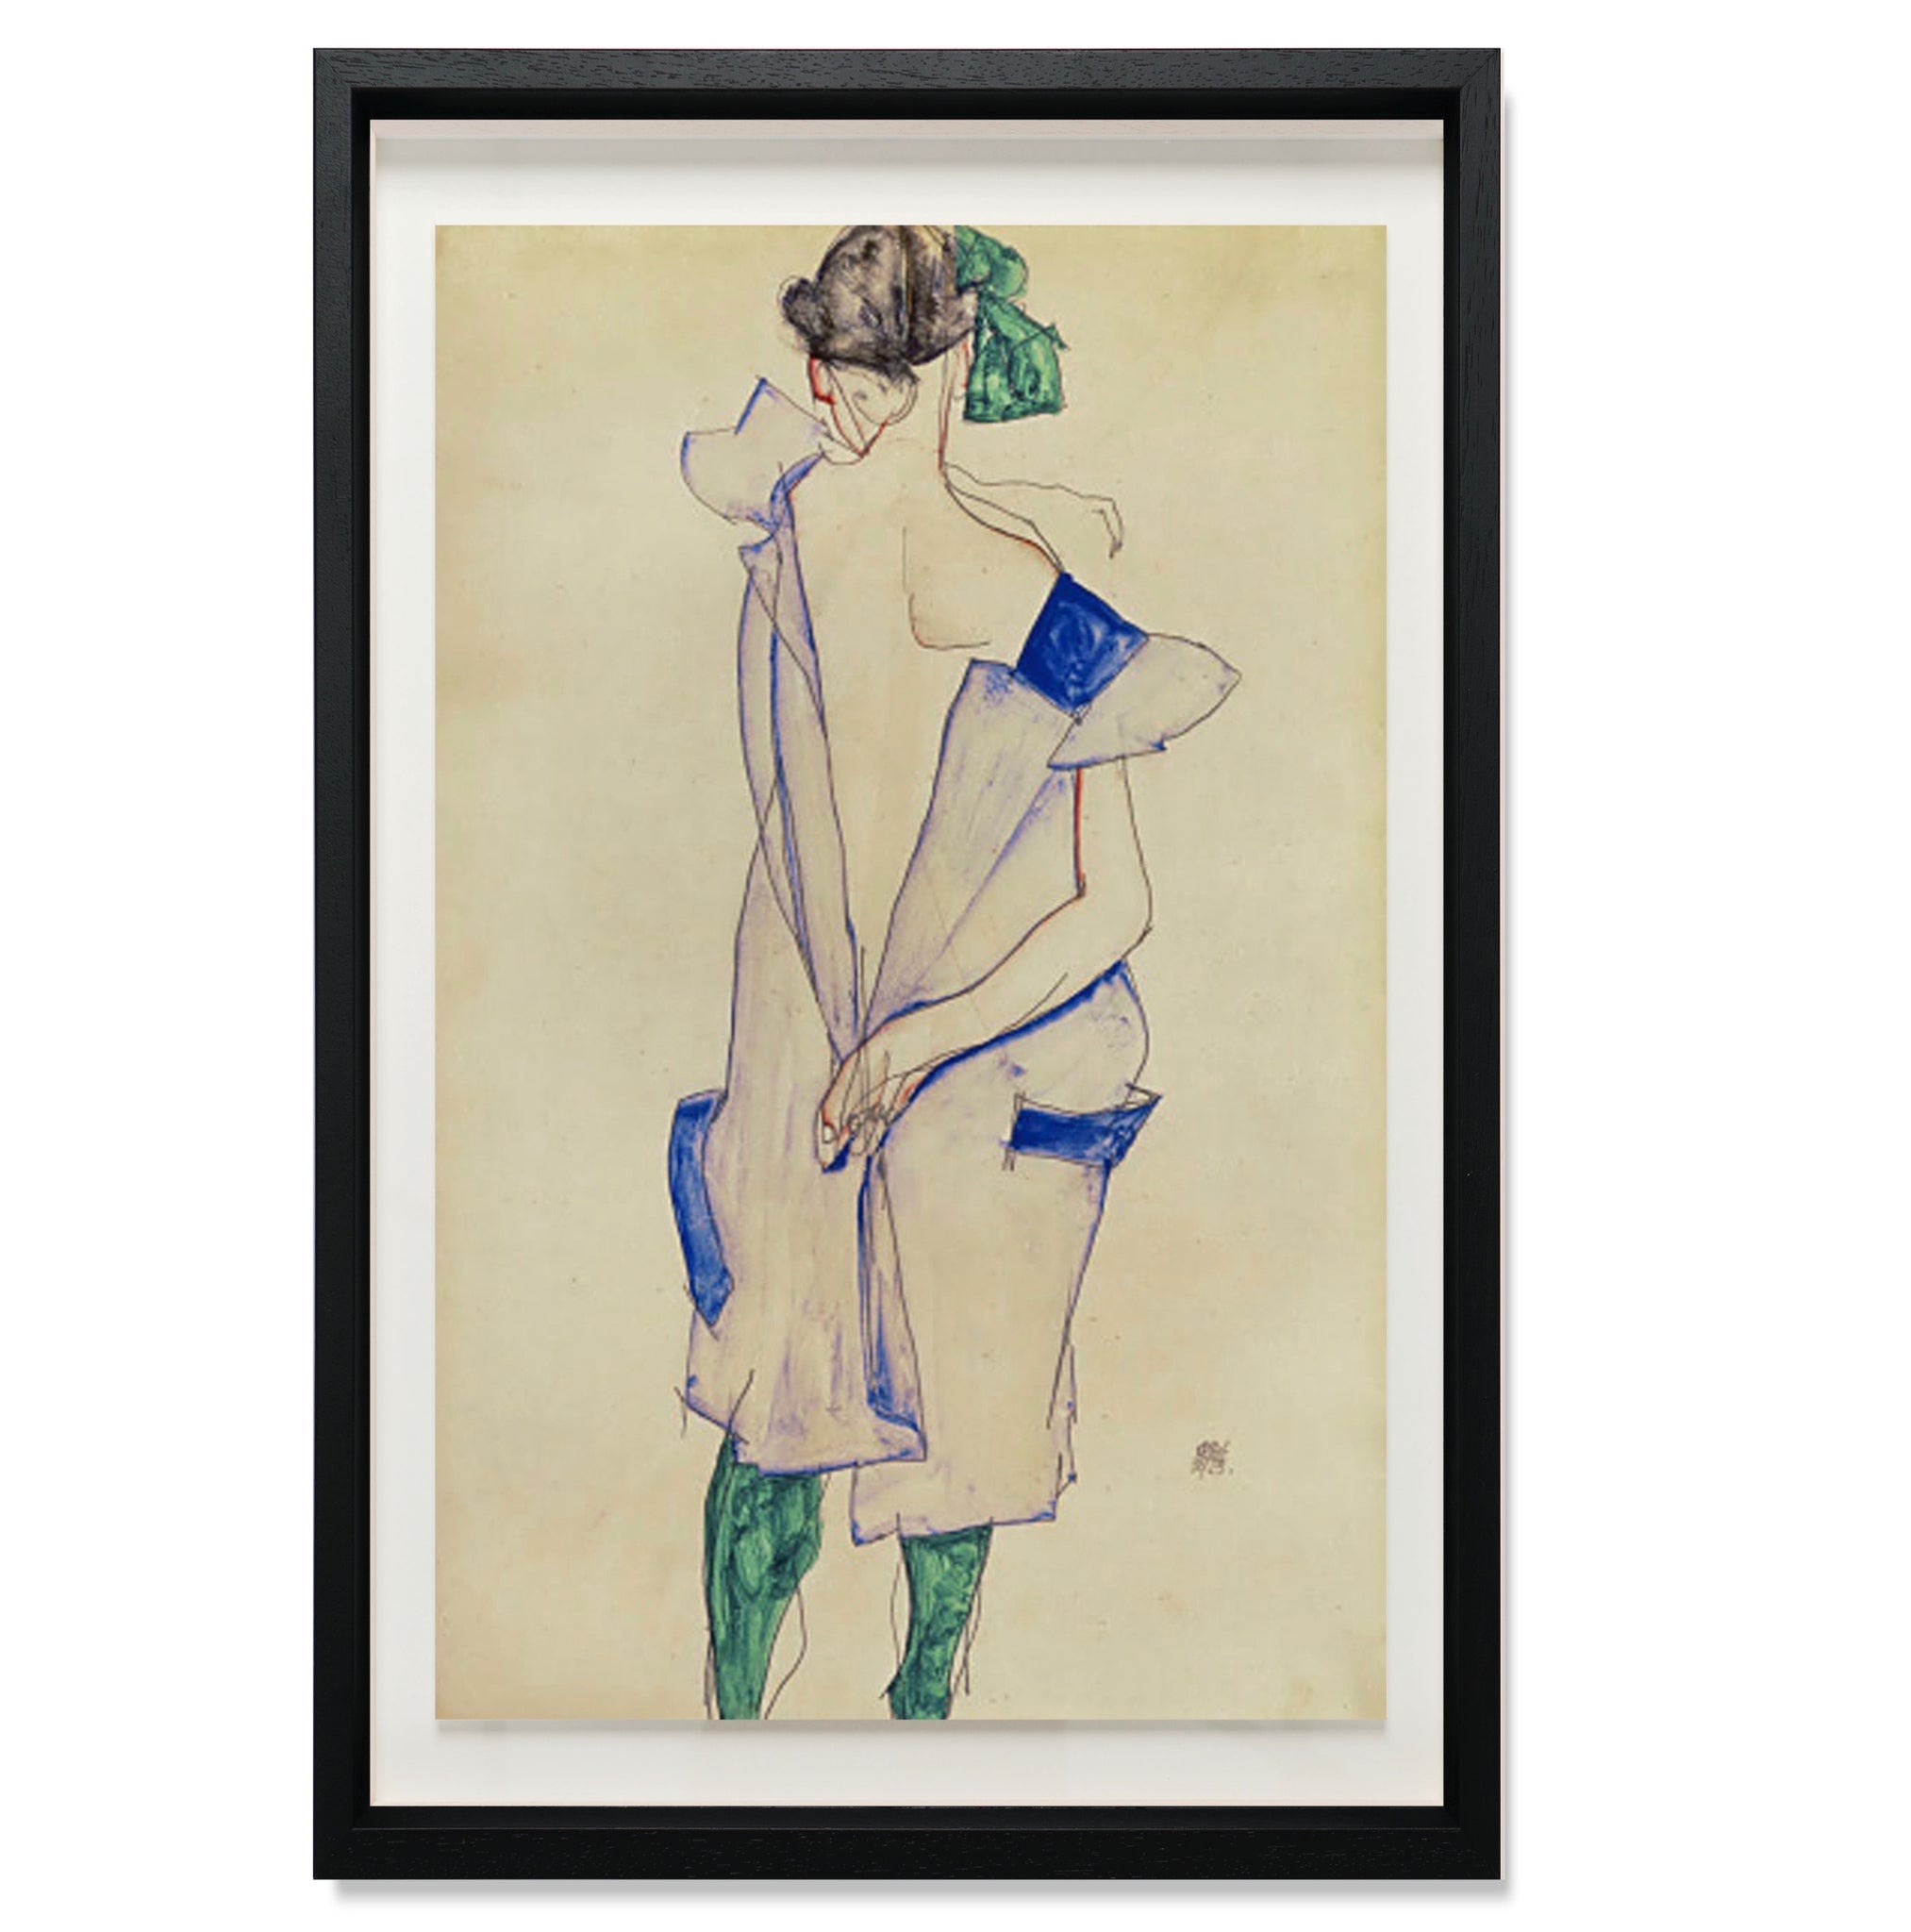 Standing girl in blue dress and green stockings, back view, 1913